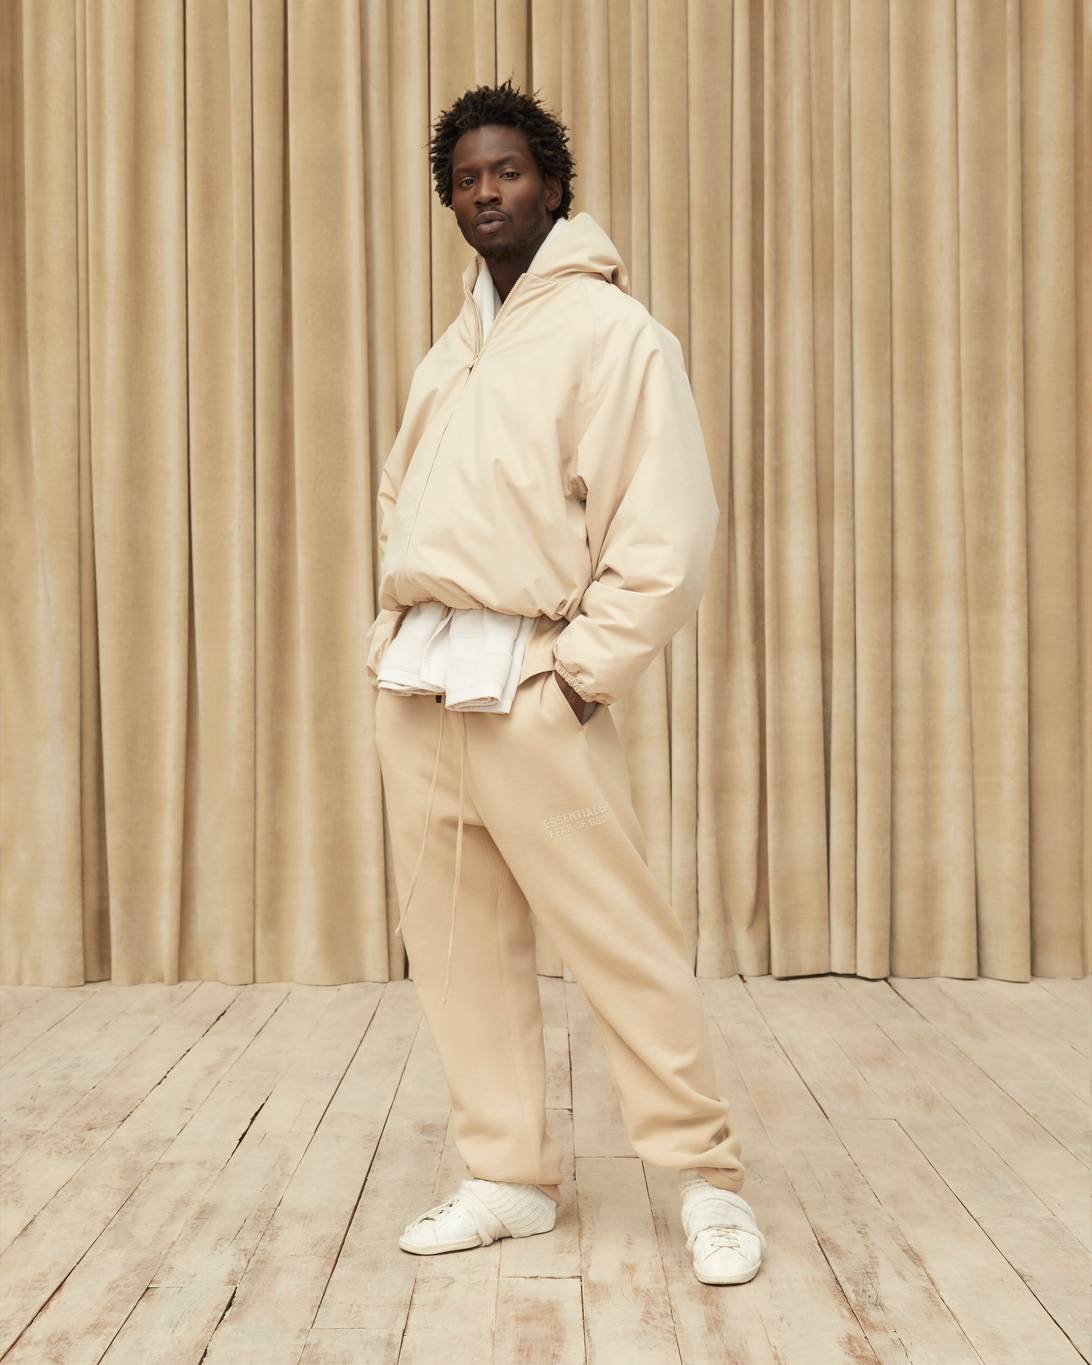 Lookbook ESSENTIALS The Spring Collection 2023 Fear of God